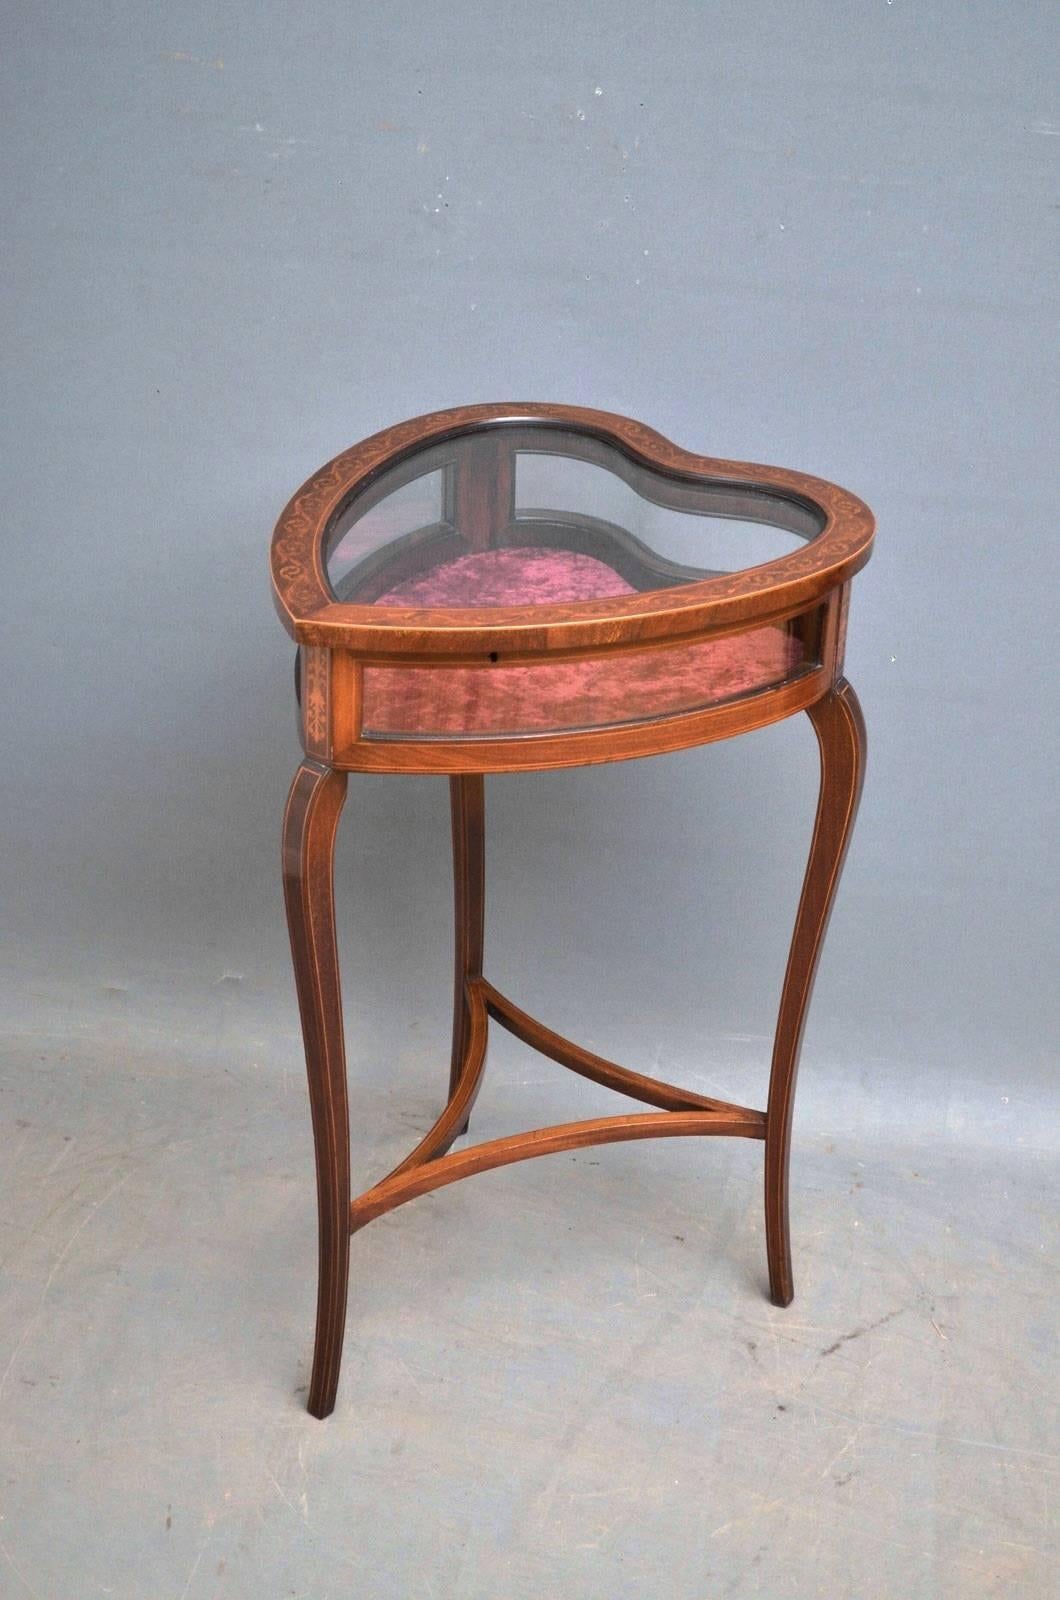 Sn4288 fine quality Edwardian inlaid display table of heart shape outline, having neoclassical inlaid hinged lid enclosing crushed velvet interior and string inlaid sides flanked by finely inlaid panels, standing on slender cabriole legs string